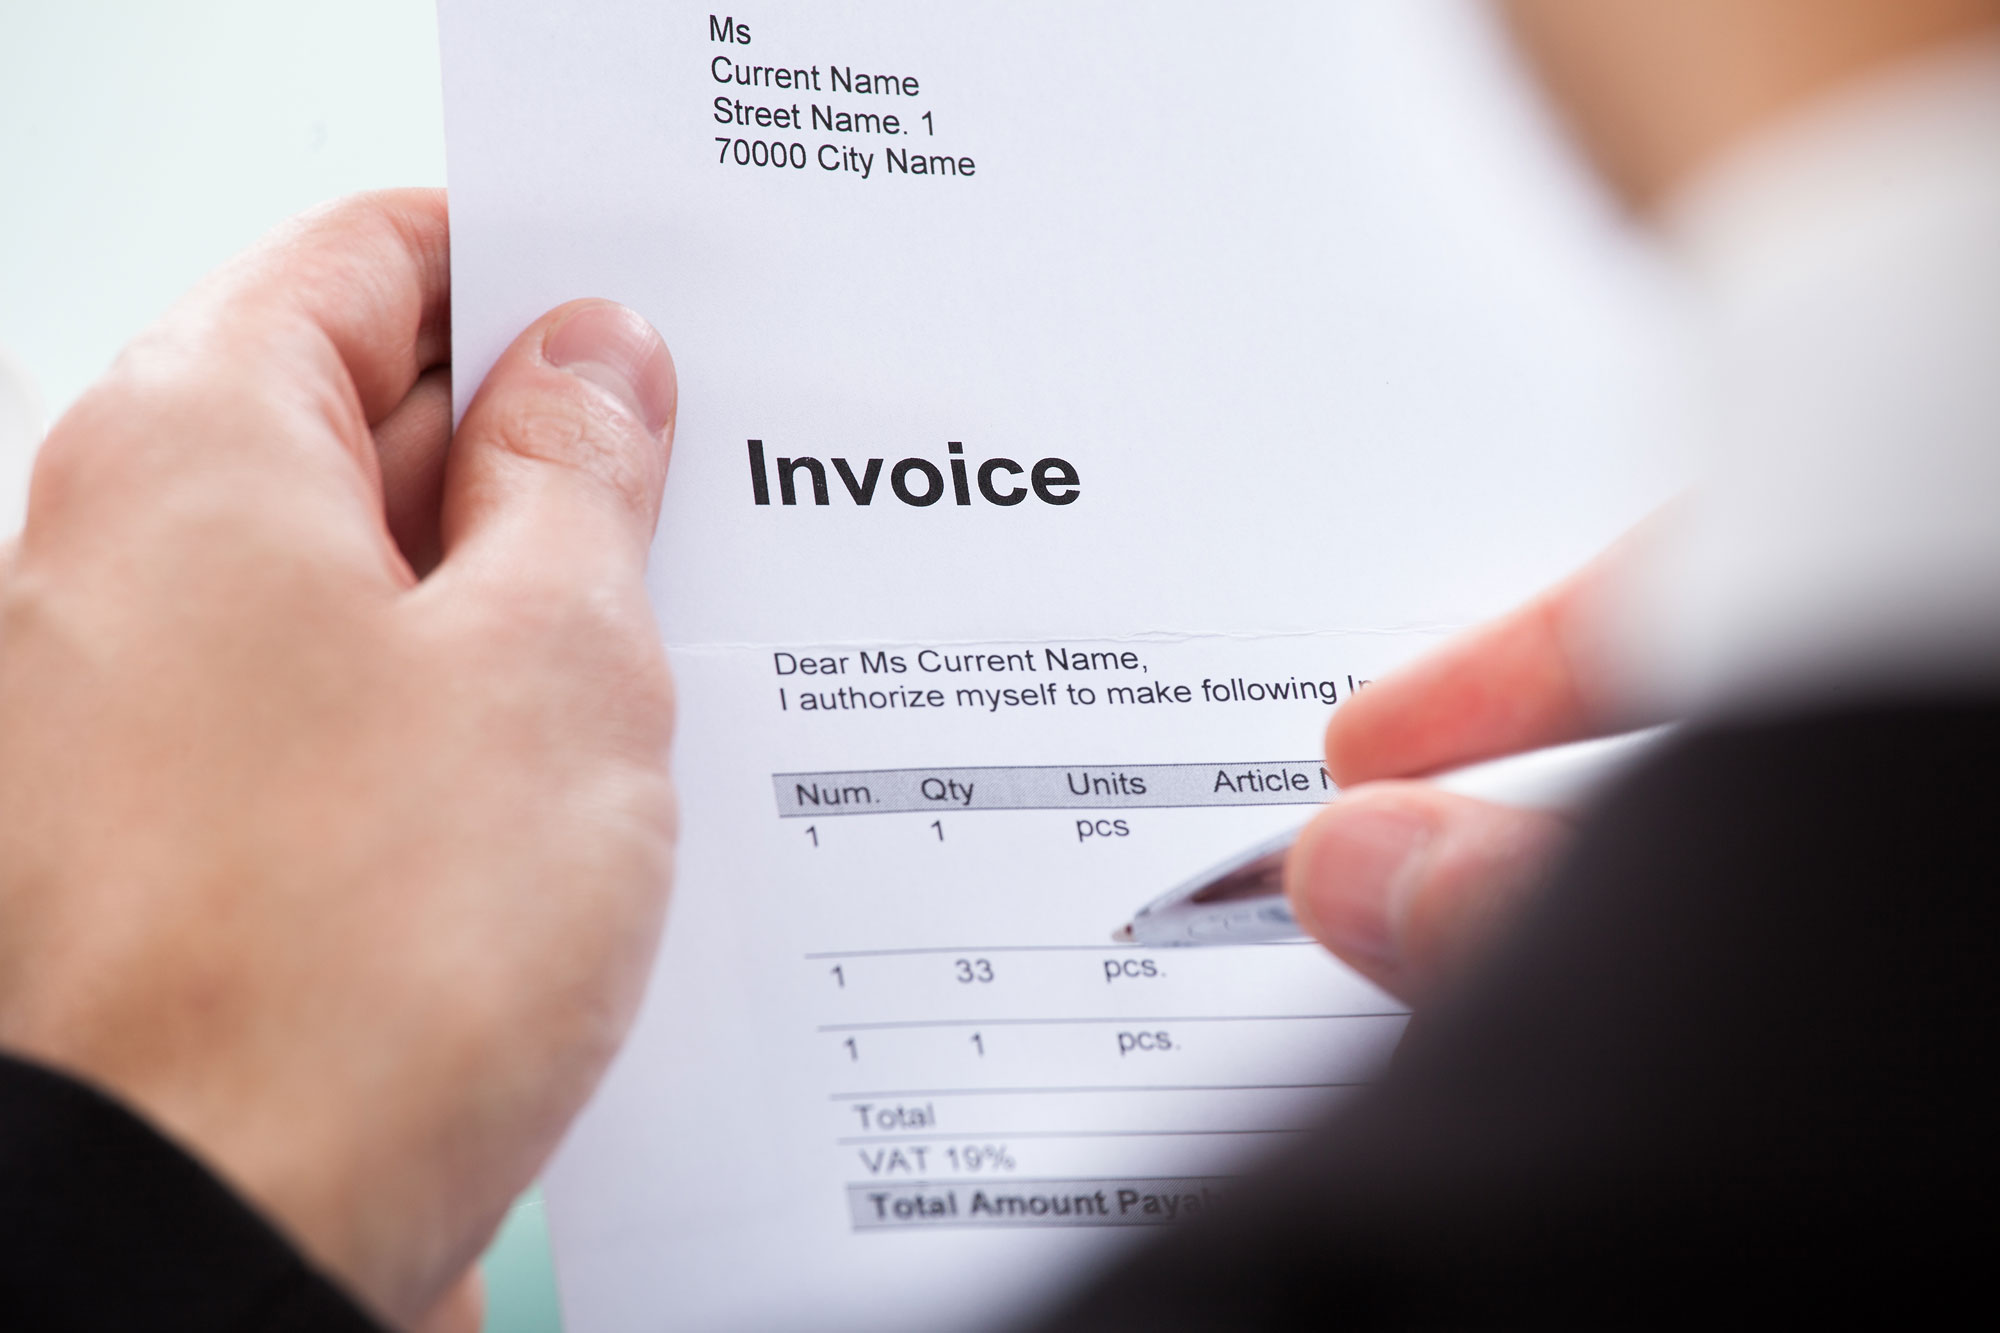 When to issue an invoice? (25)